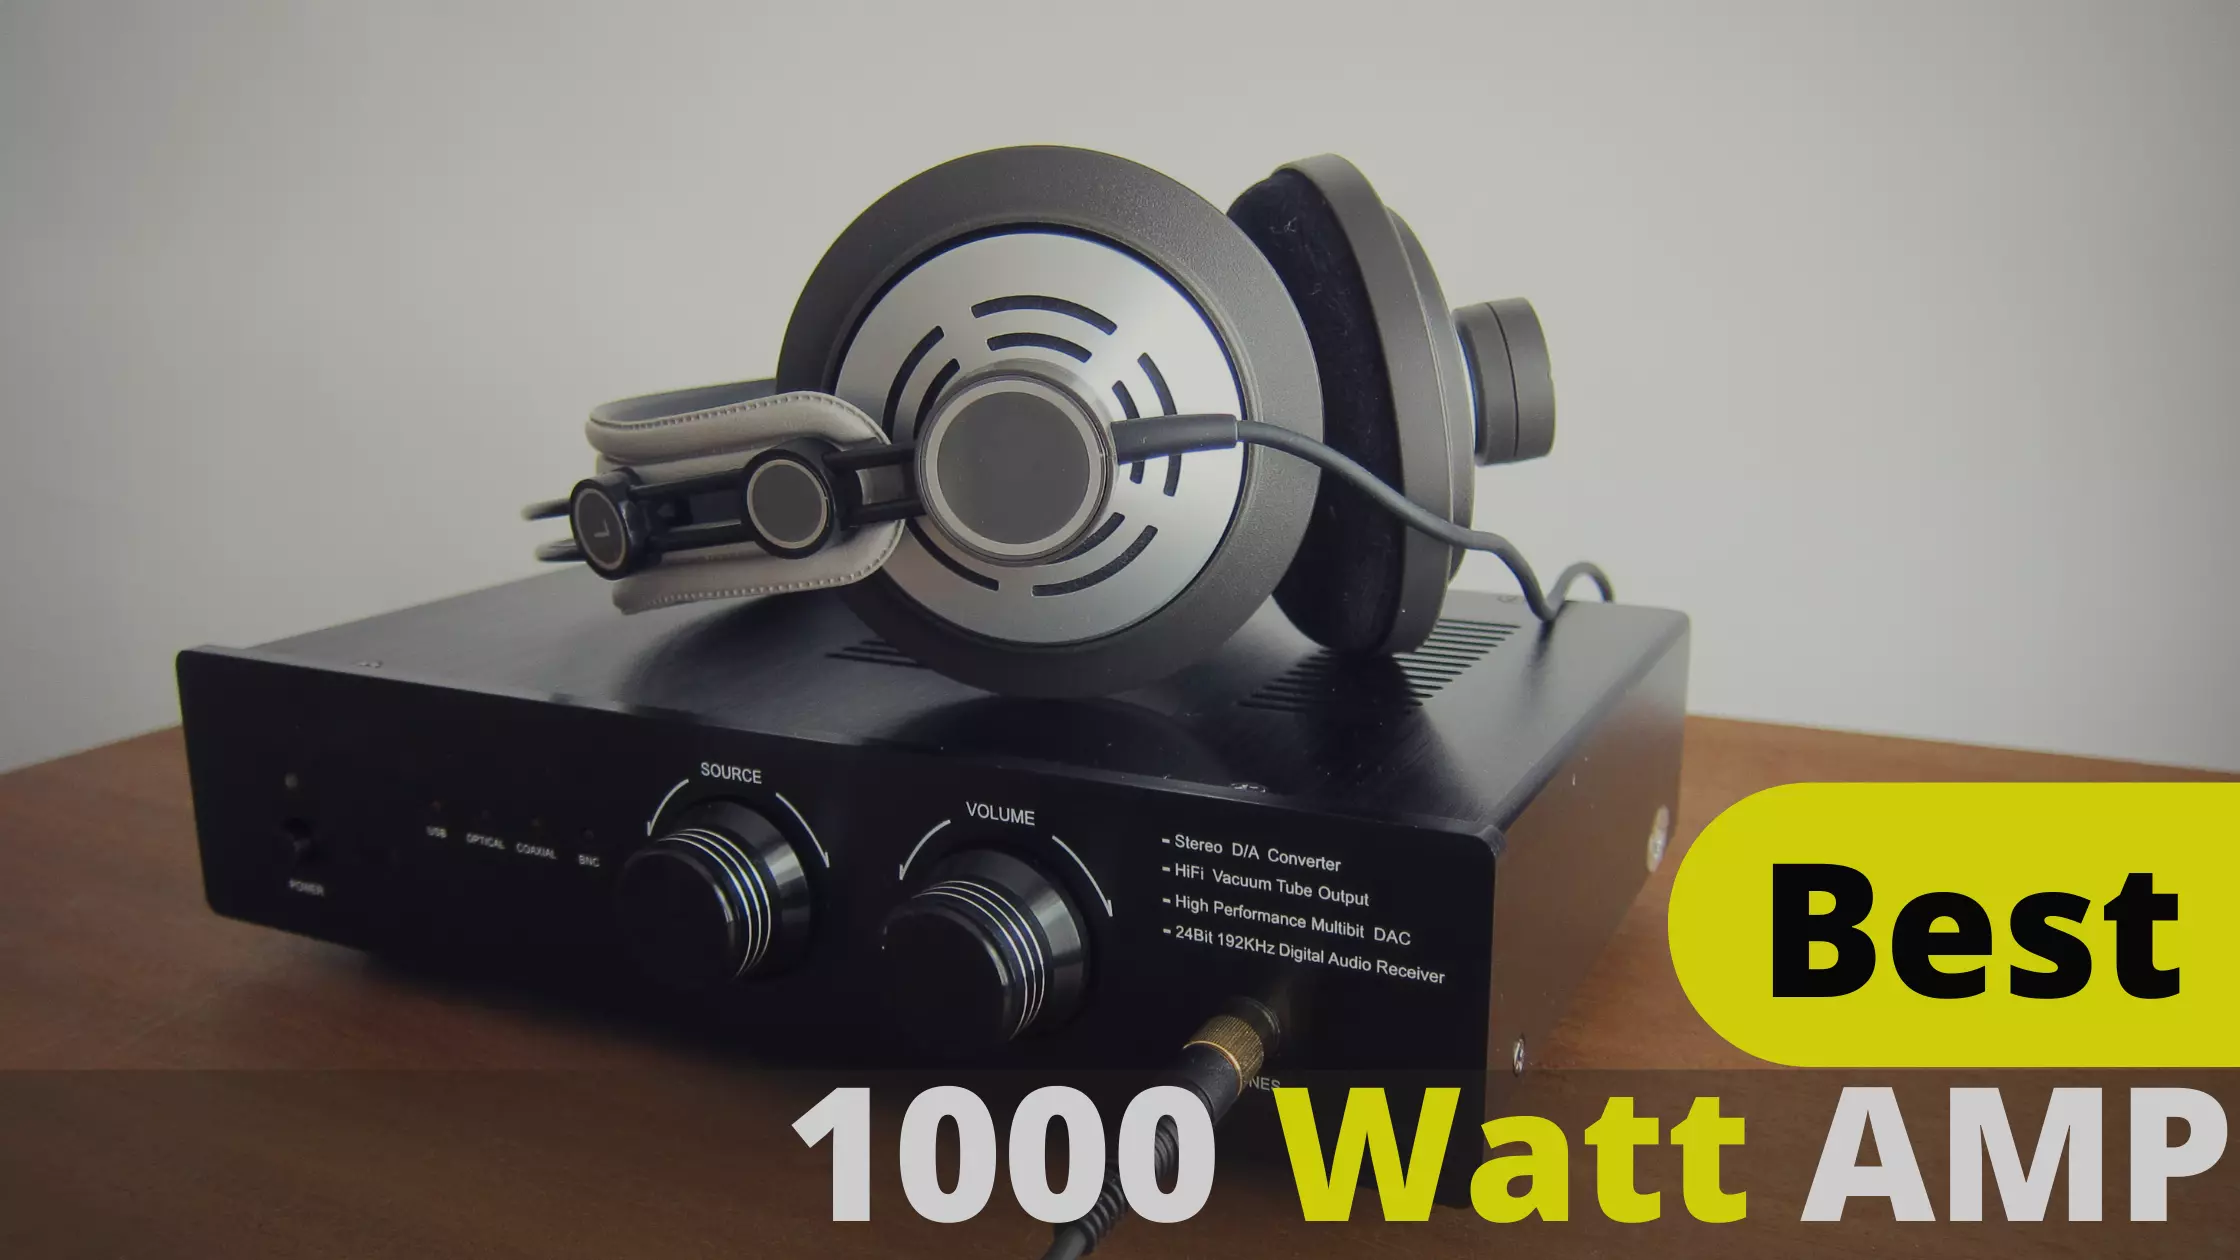 Best 1000 Watt Amp With Complete Shopping Tips